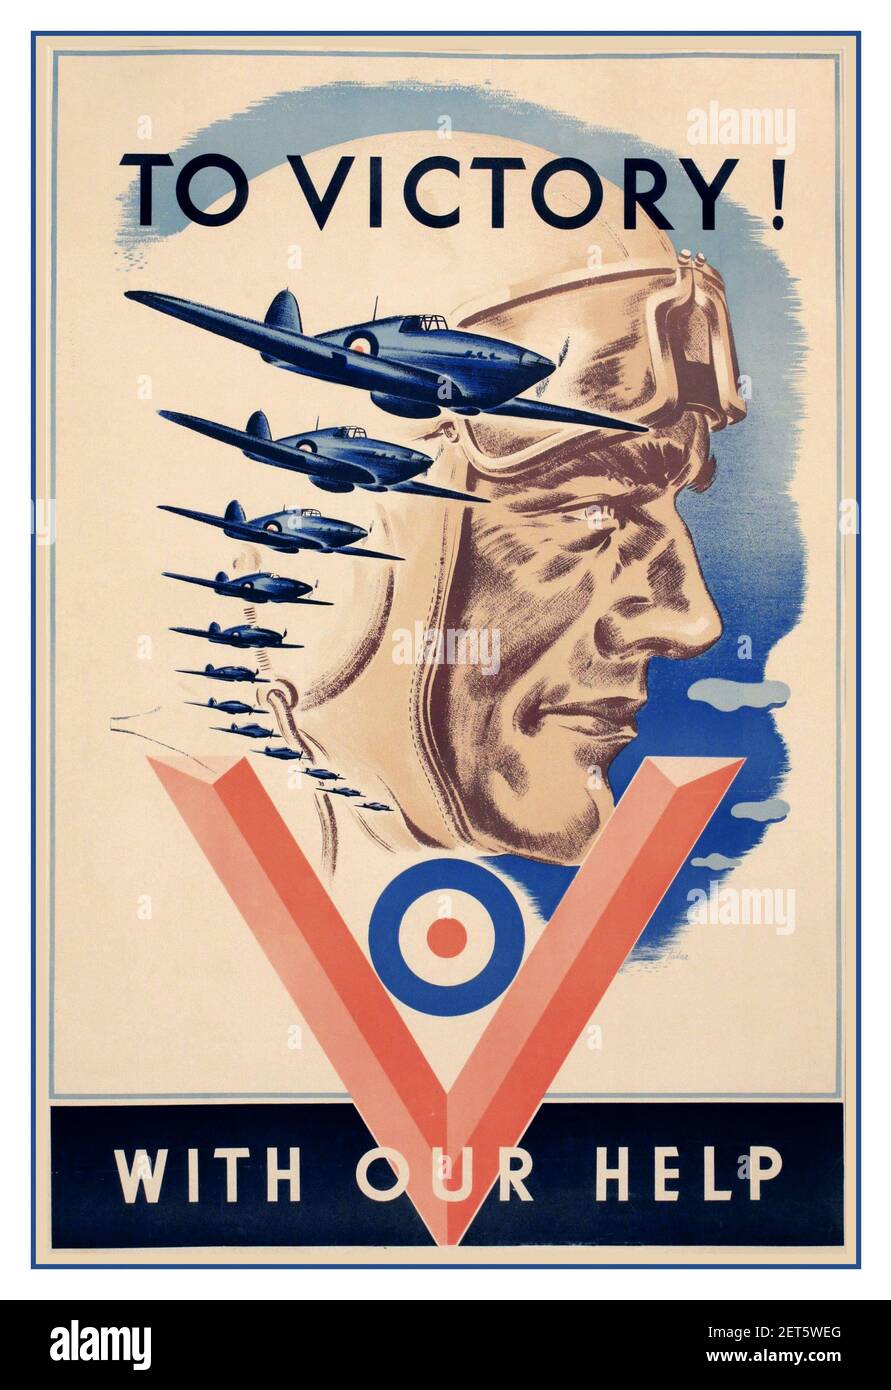 VINTAGE WW2 PROPAGANDA POSTER To Victory! Vintage Poster (artist: Taber) Canada c. 1941 With our UK help with supply of Hawker Hurricanes donated to Canada's War Effort...Printed by Massey-Harris for distribution in England c.1940s WW2 World War II Second World War Taber (dates unknown) To Victory - With Our Help Hurricanes, original poster printed by Massey Harris Press, Toronto Canada 1941 Stock Photo